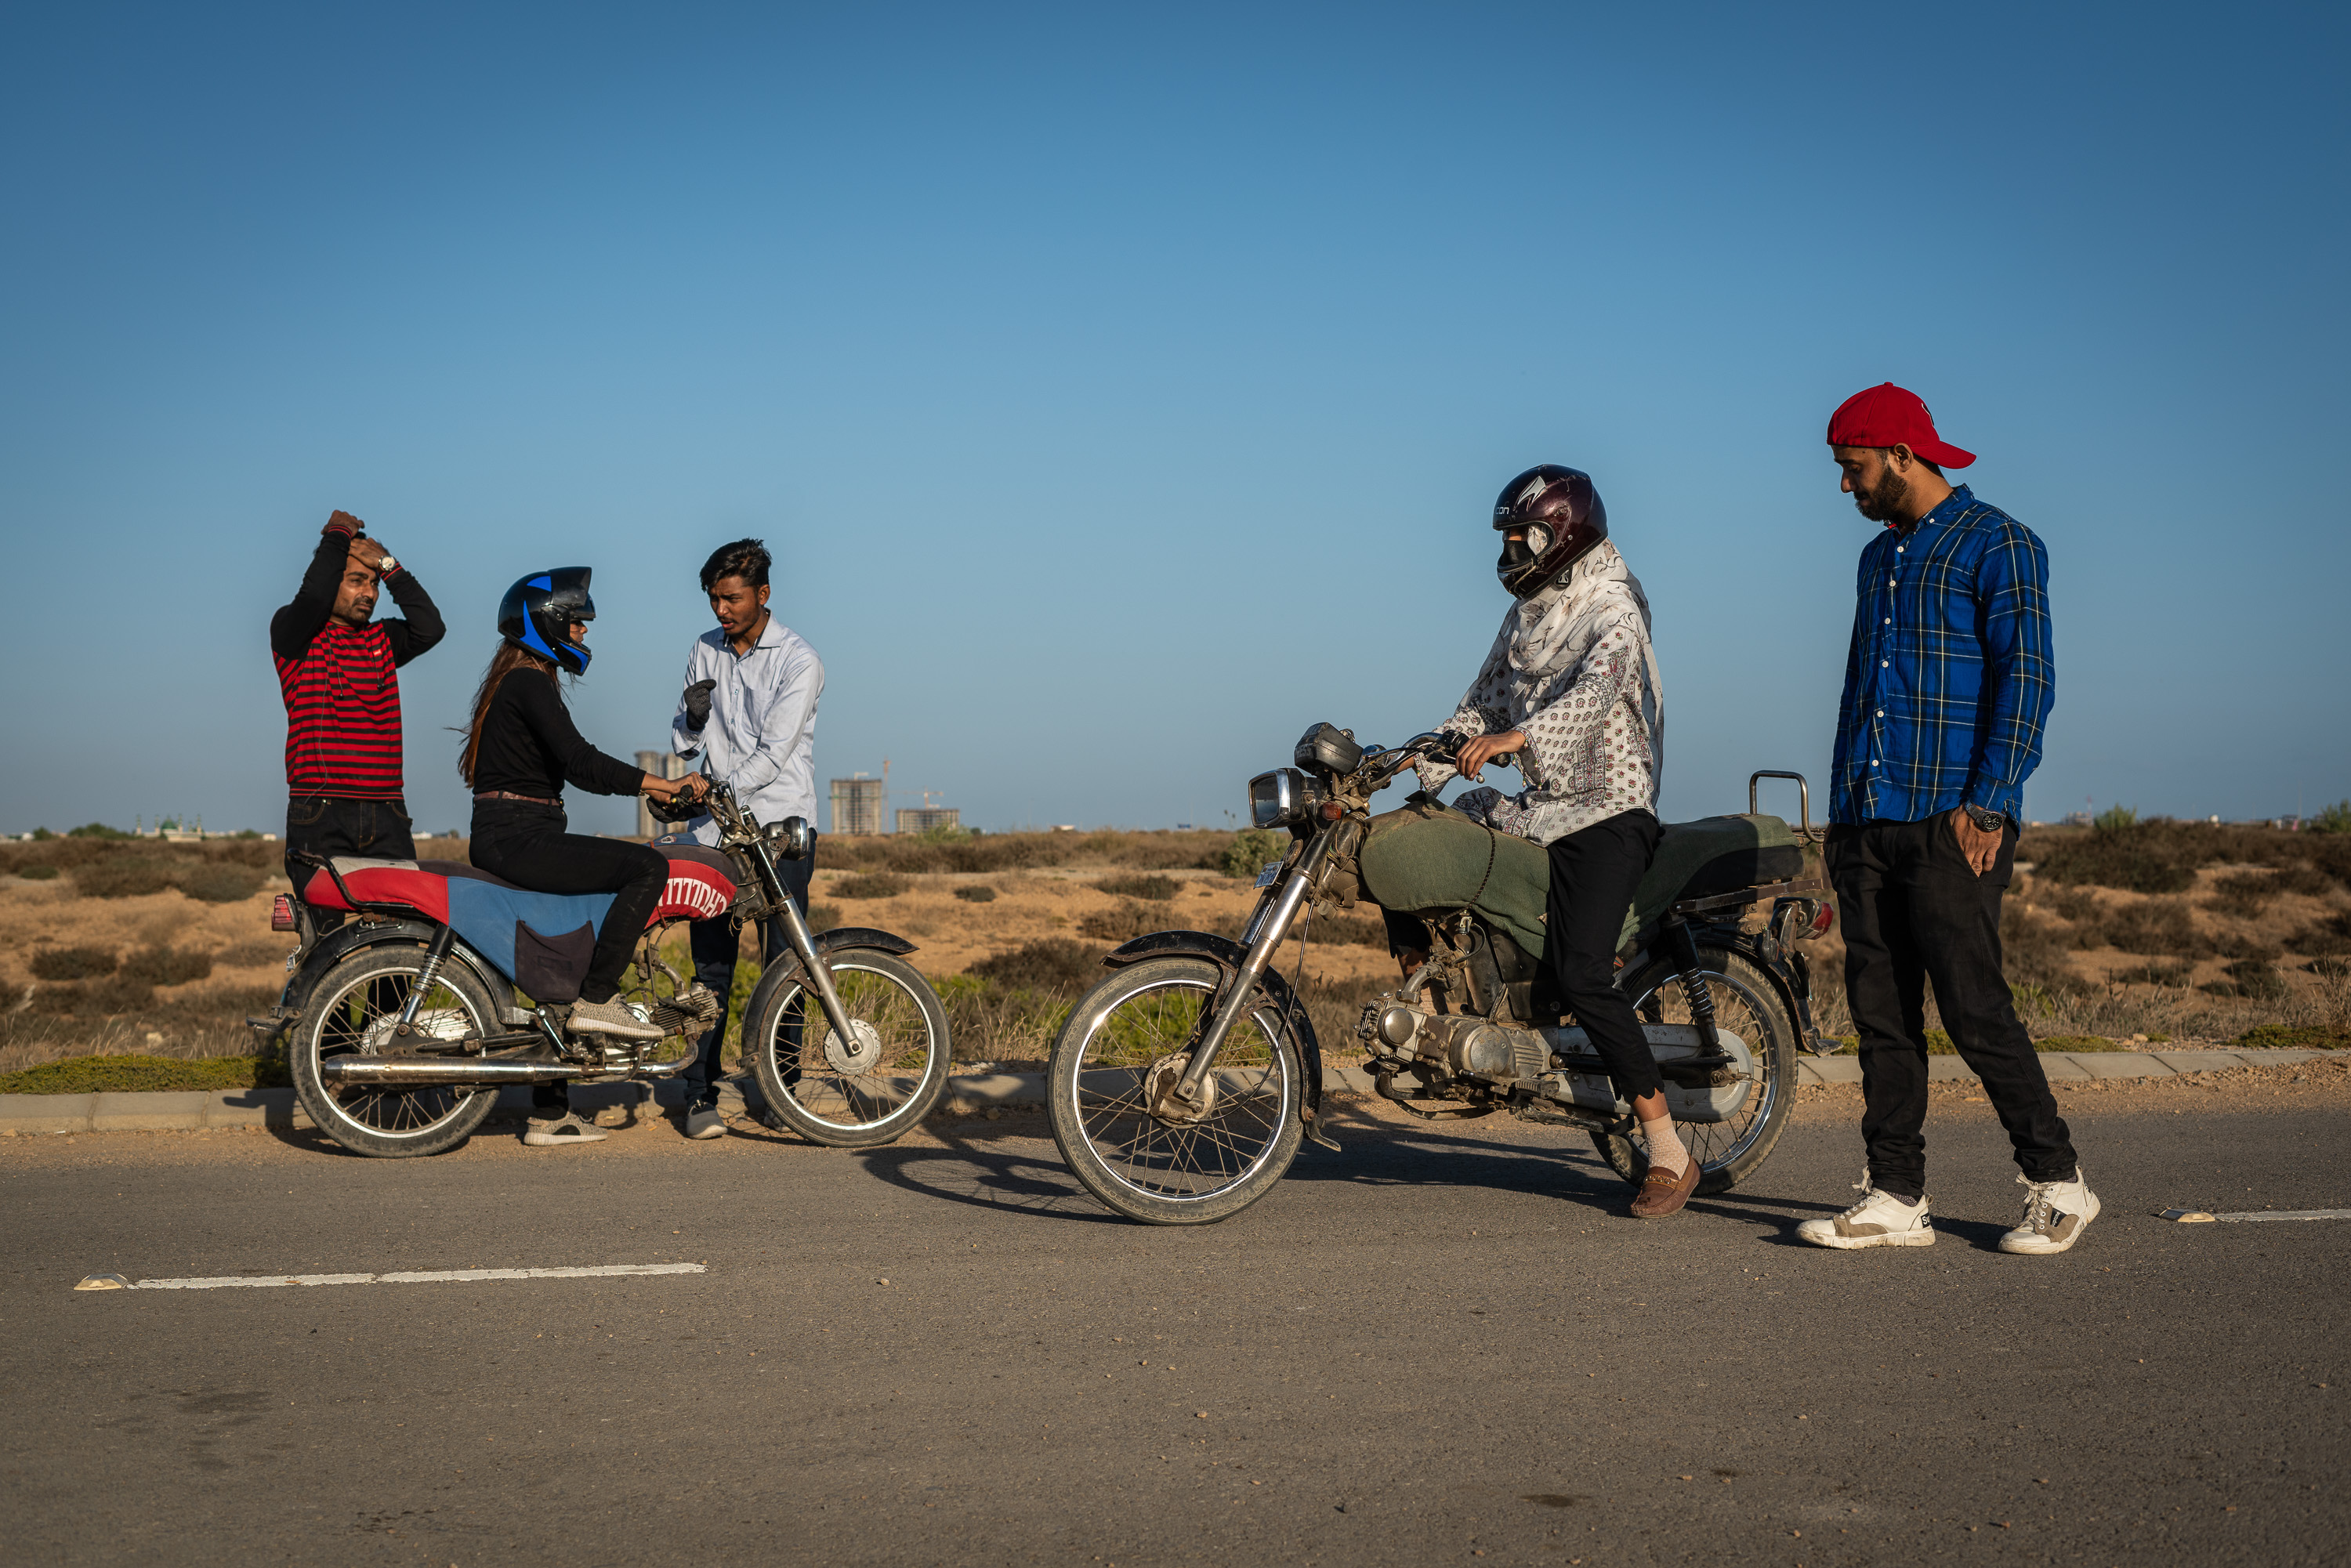 Sairah Abbasi (2nd from right) and Khizra Ail (2nd from left) receive directions from their Pink Riders instructors during a lesson in Karachi, Pakistan (photo: Philipp Breu)